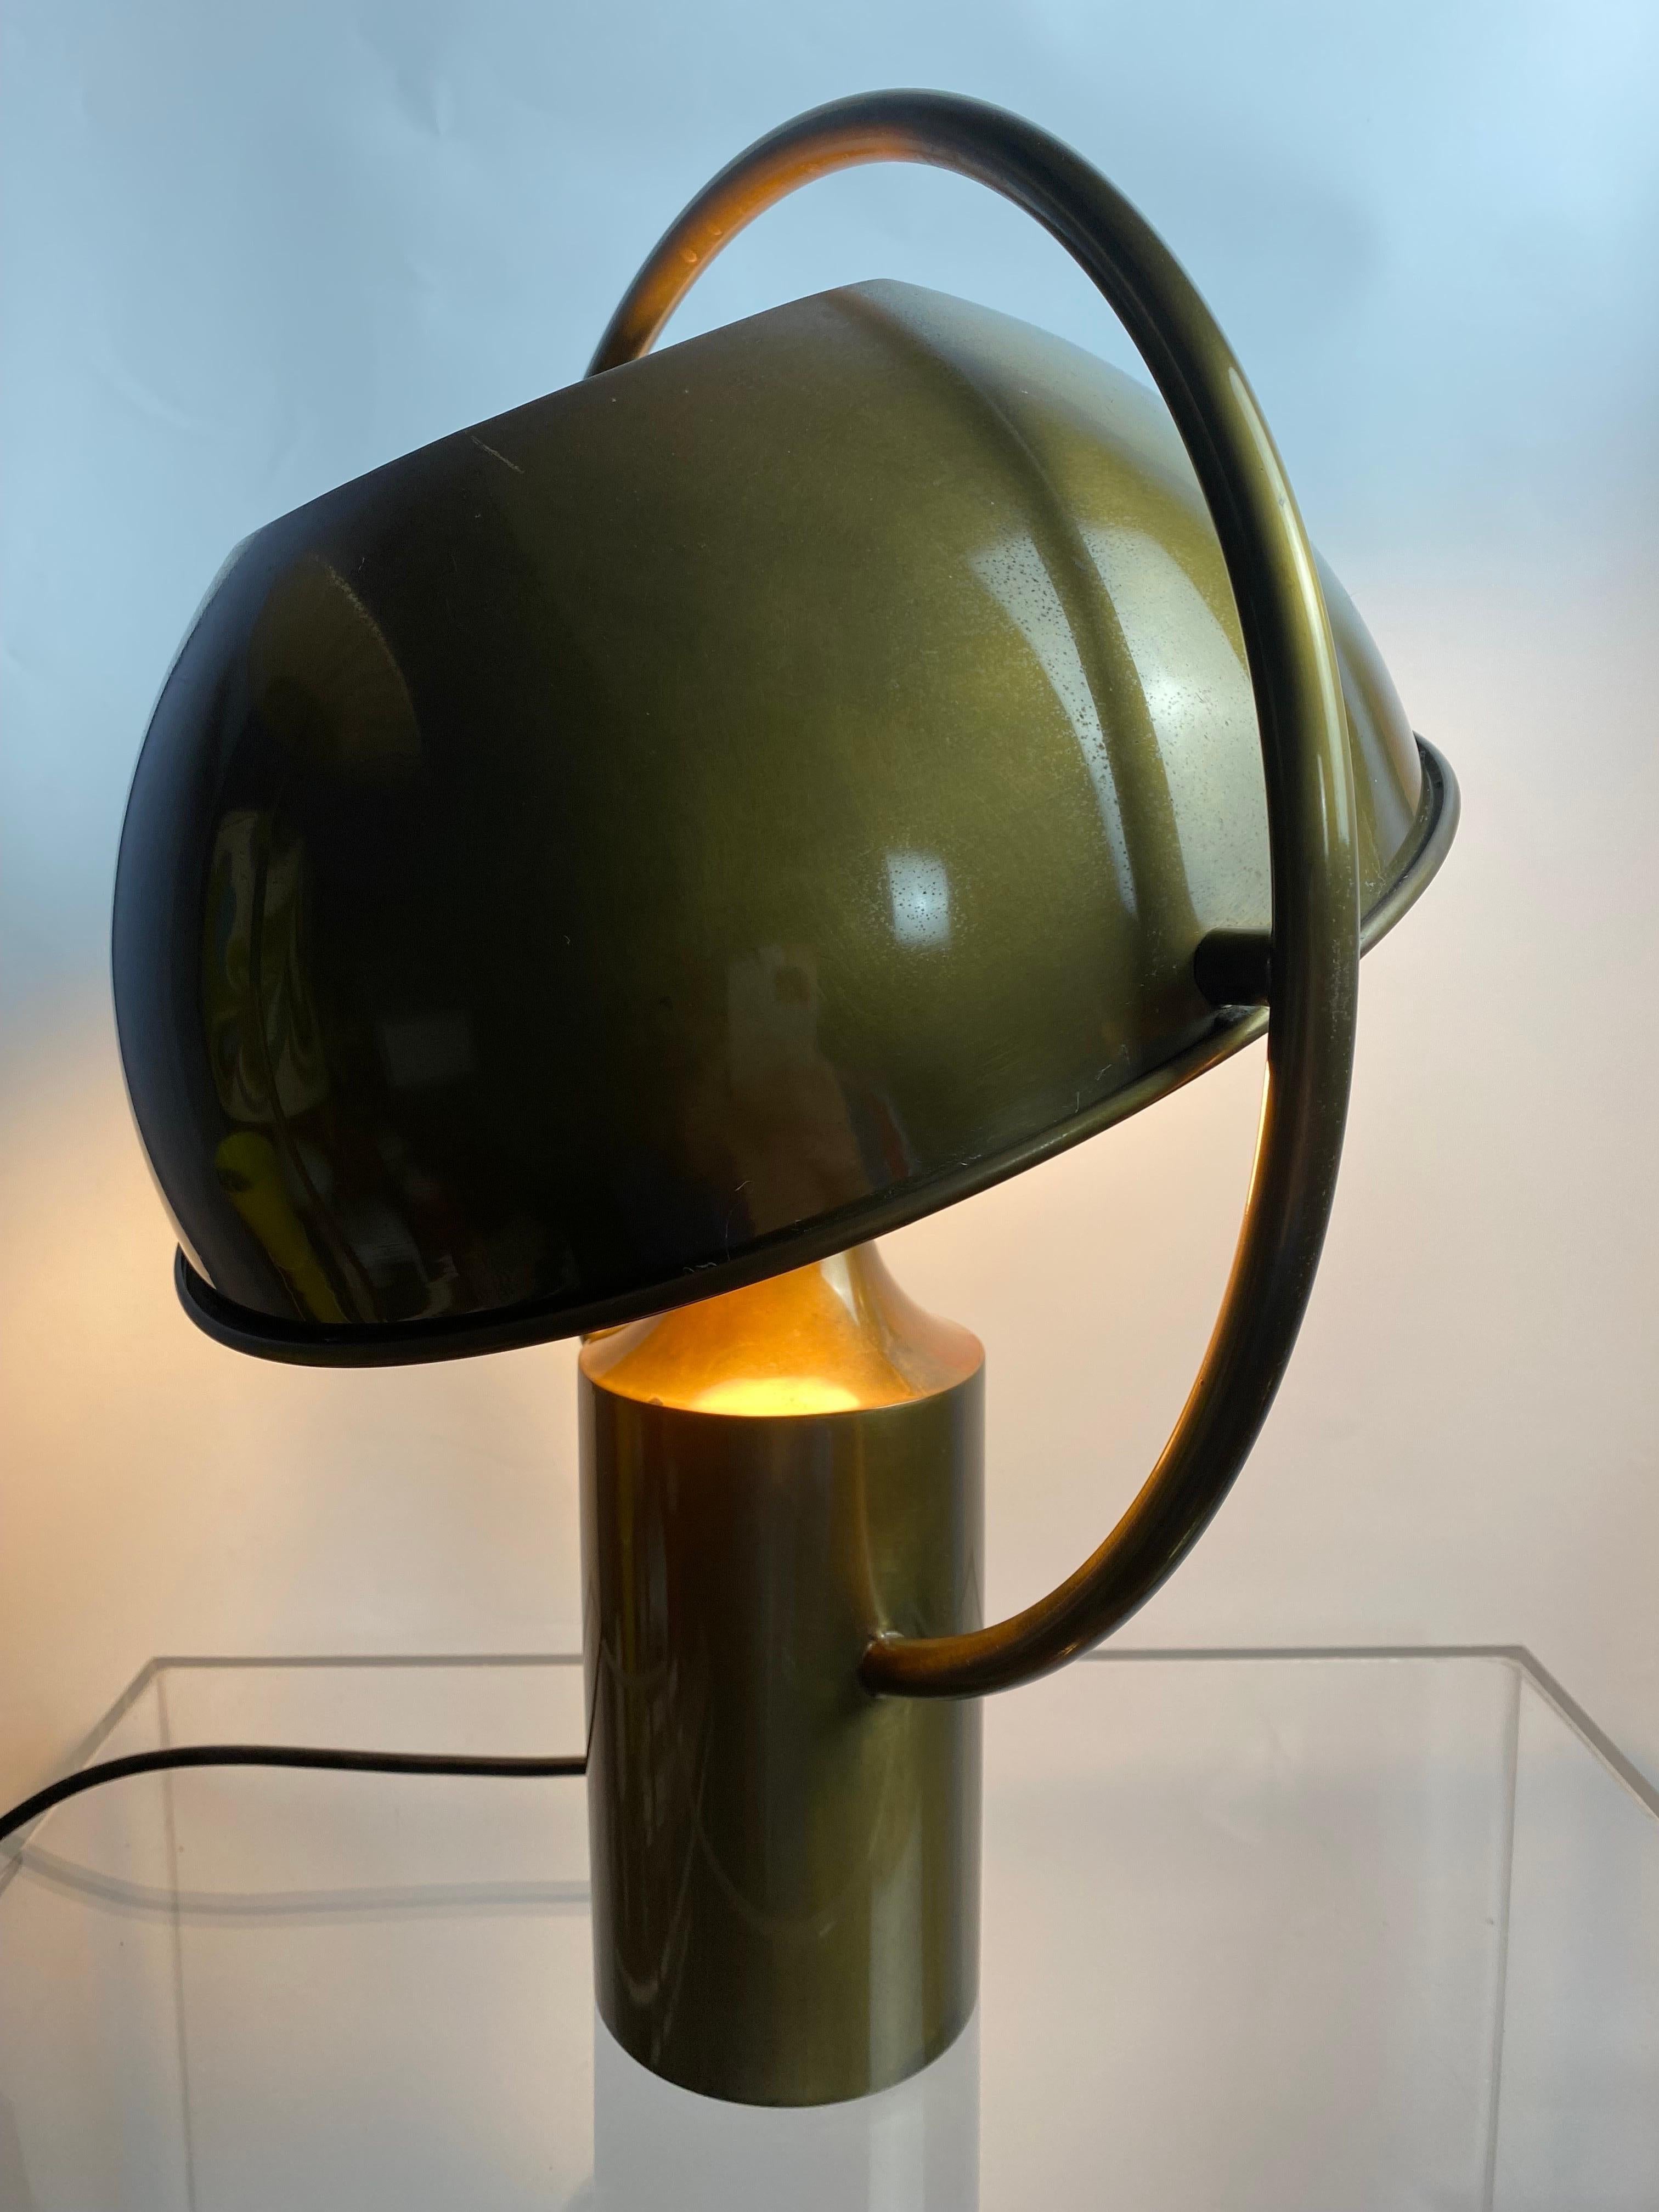 Rare German Midcentury Table Lamp in Solid Brass by Günter&Florian Schulz 1970s For Sale 7